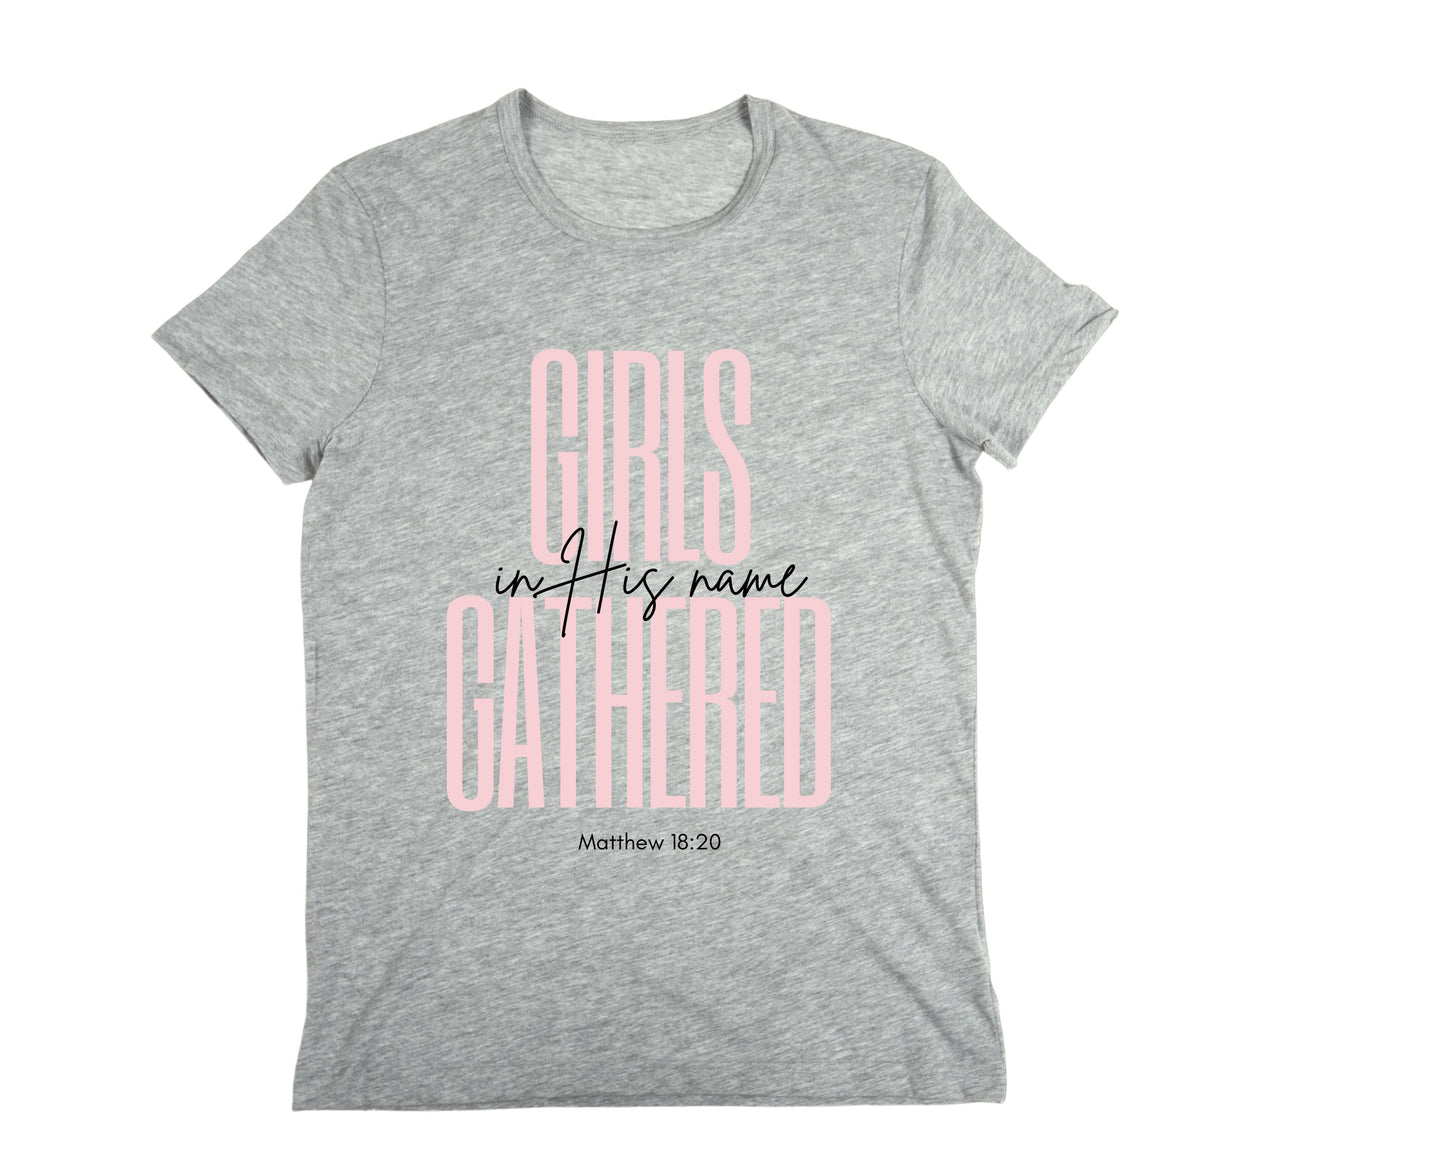 Christian girls T-Shirt for Small Groups in Gray 